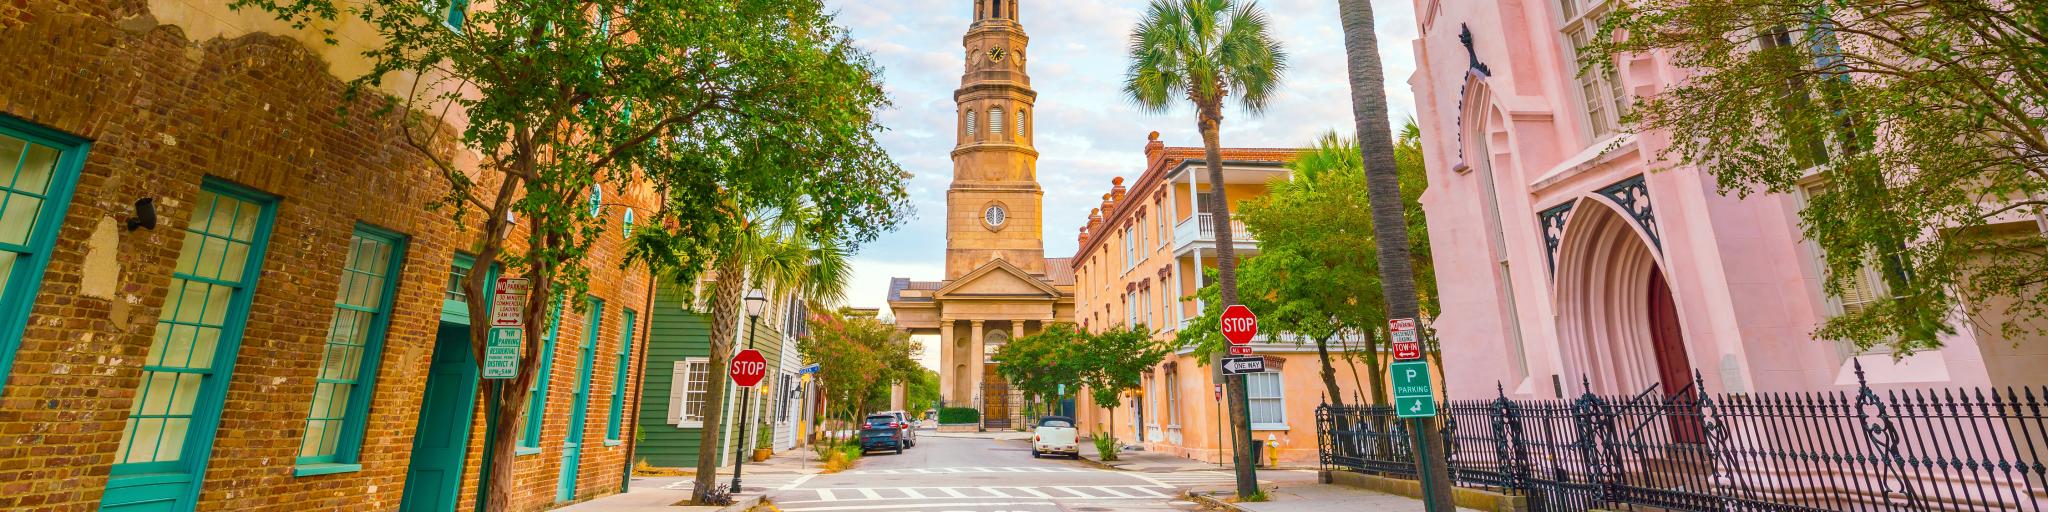 A scenic road with fascinating old buildings in pink, orange, green, and powder blue at twilight in the historic downtown of Charleston, South Carolina 